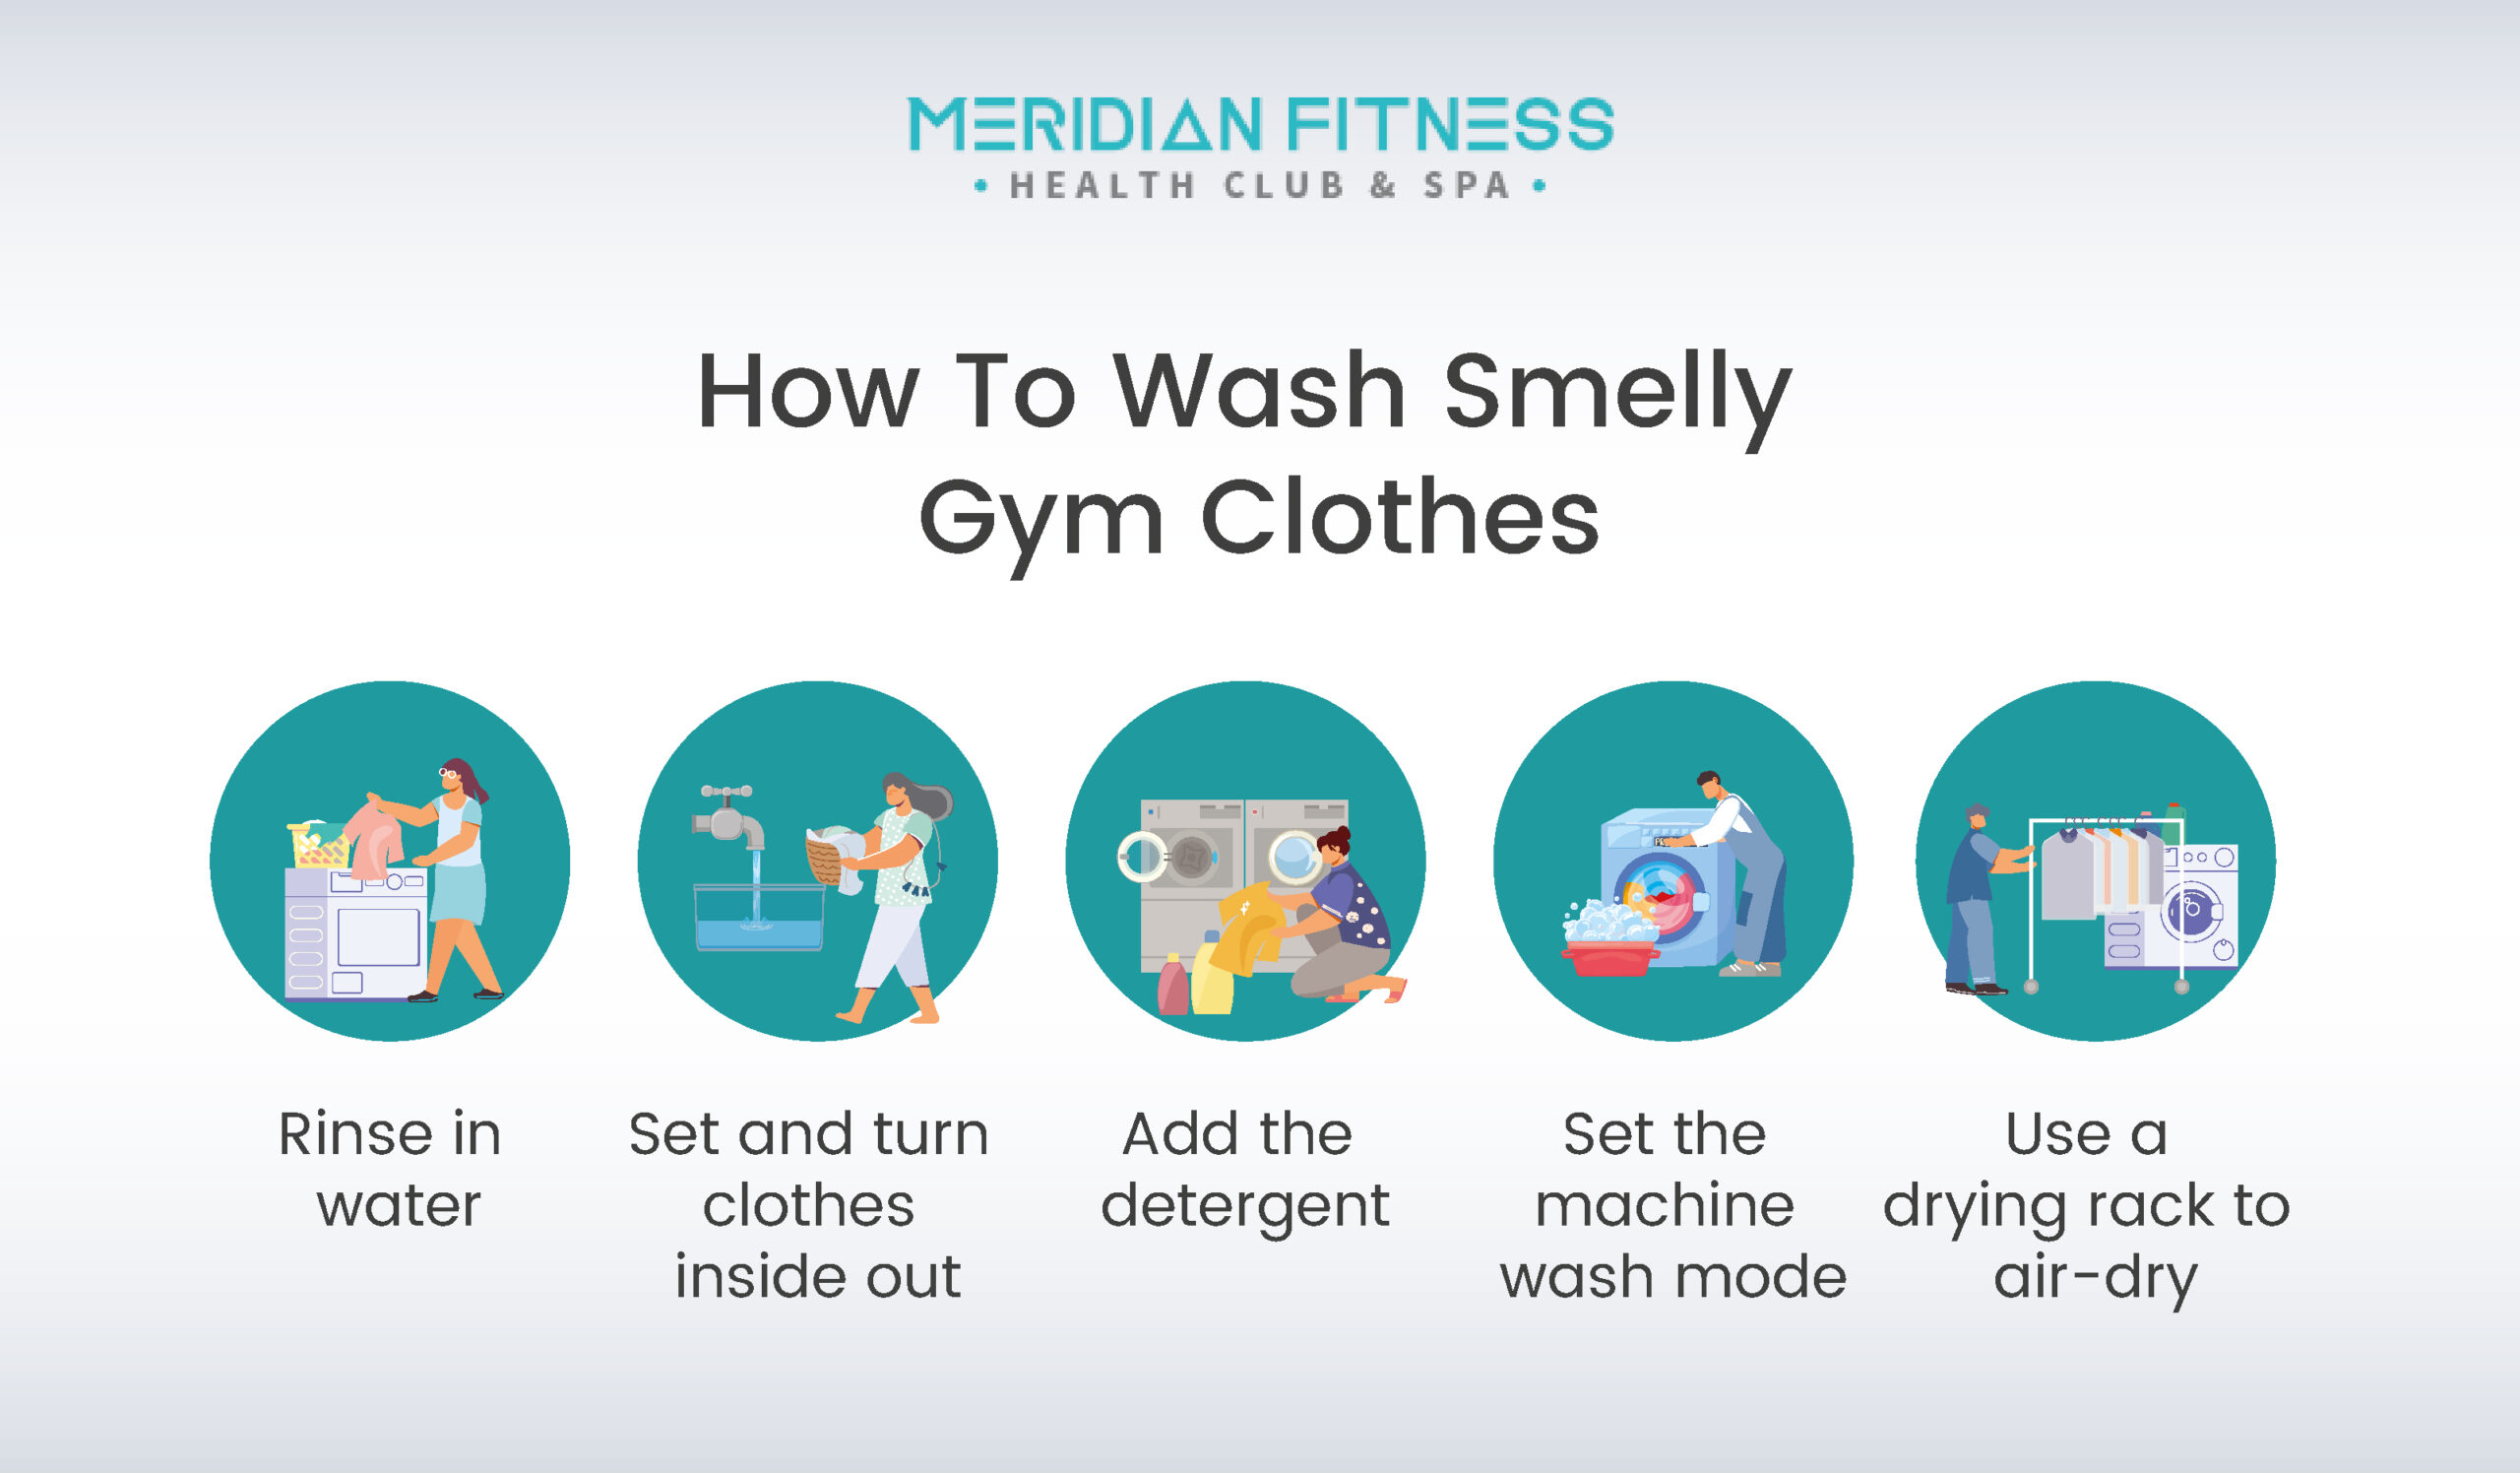 How To Wash Smelly Gym Clothes